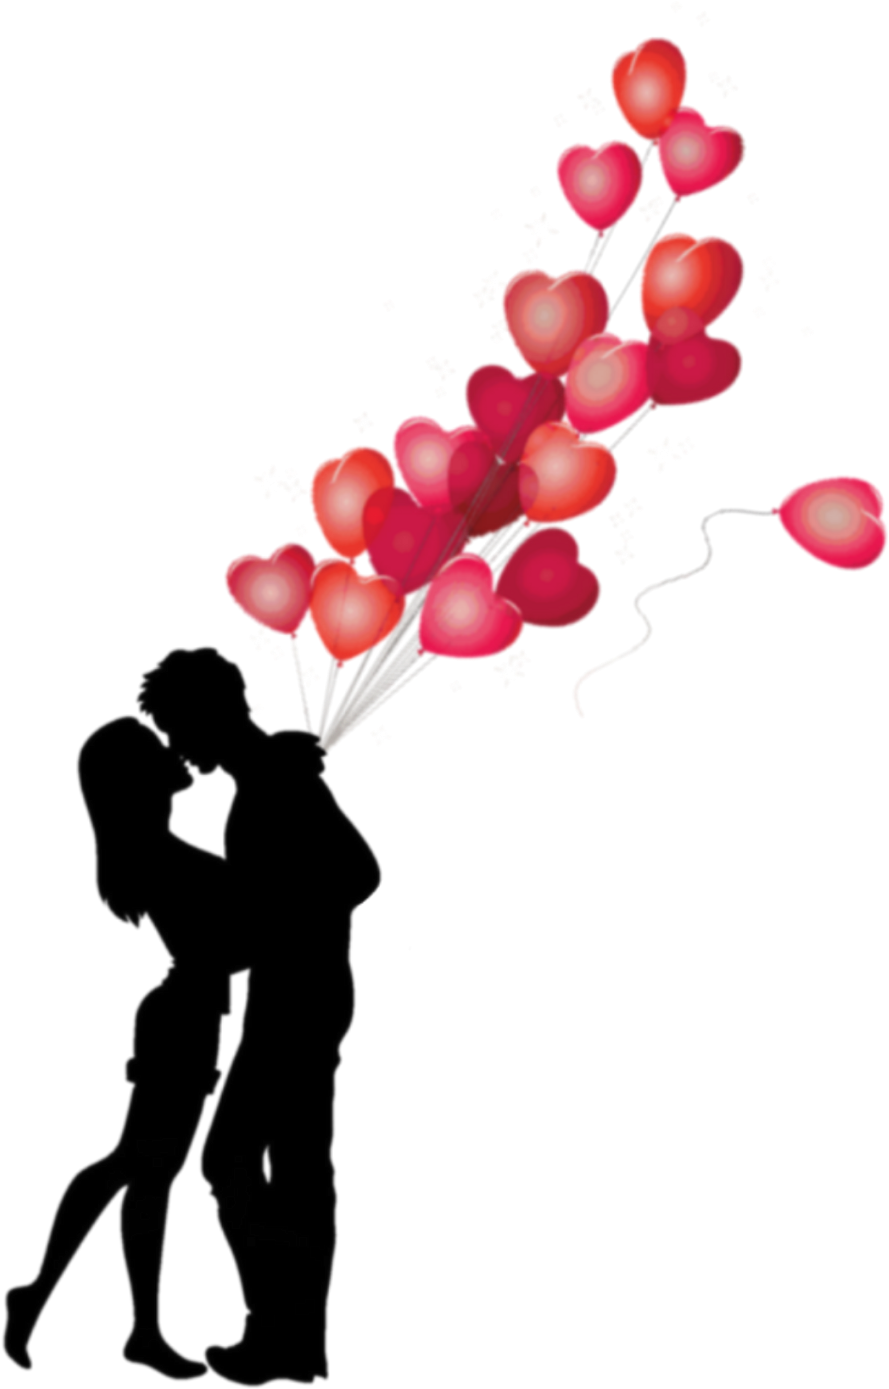 Download Romantic Silhouette Couple With Heart Balloons | Wallpapers.com